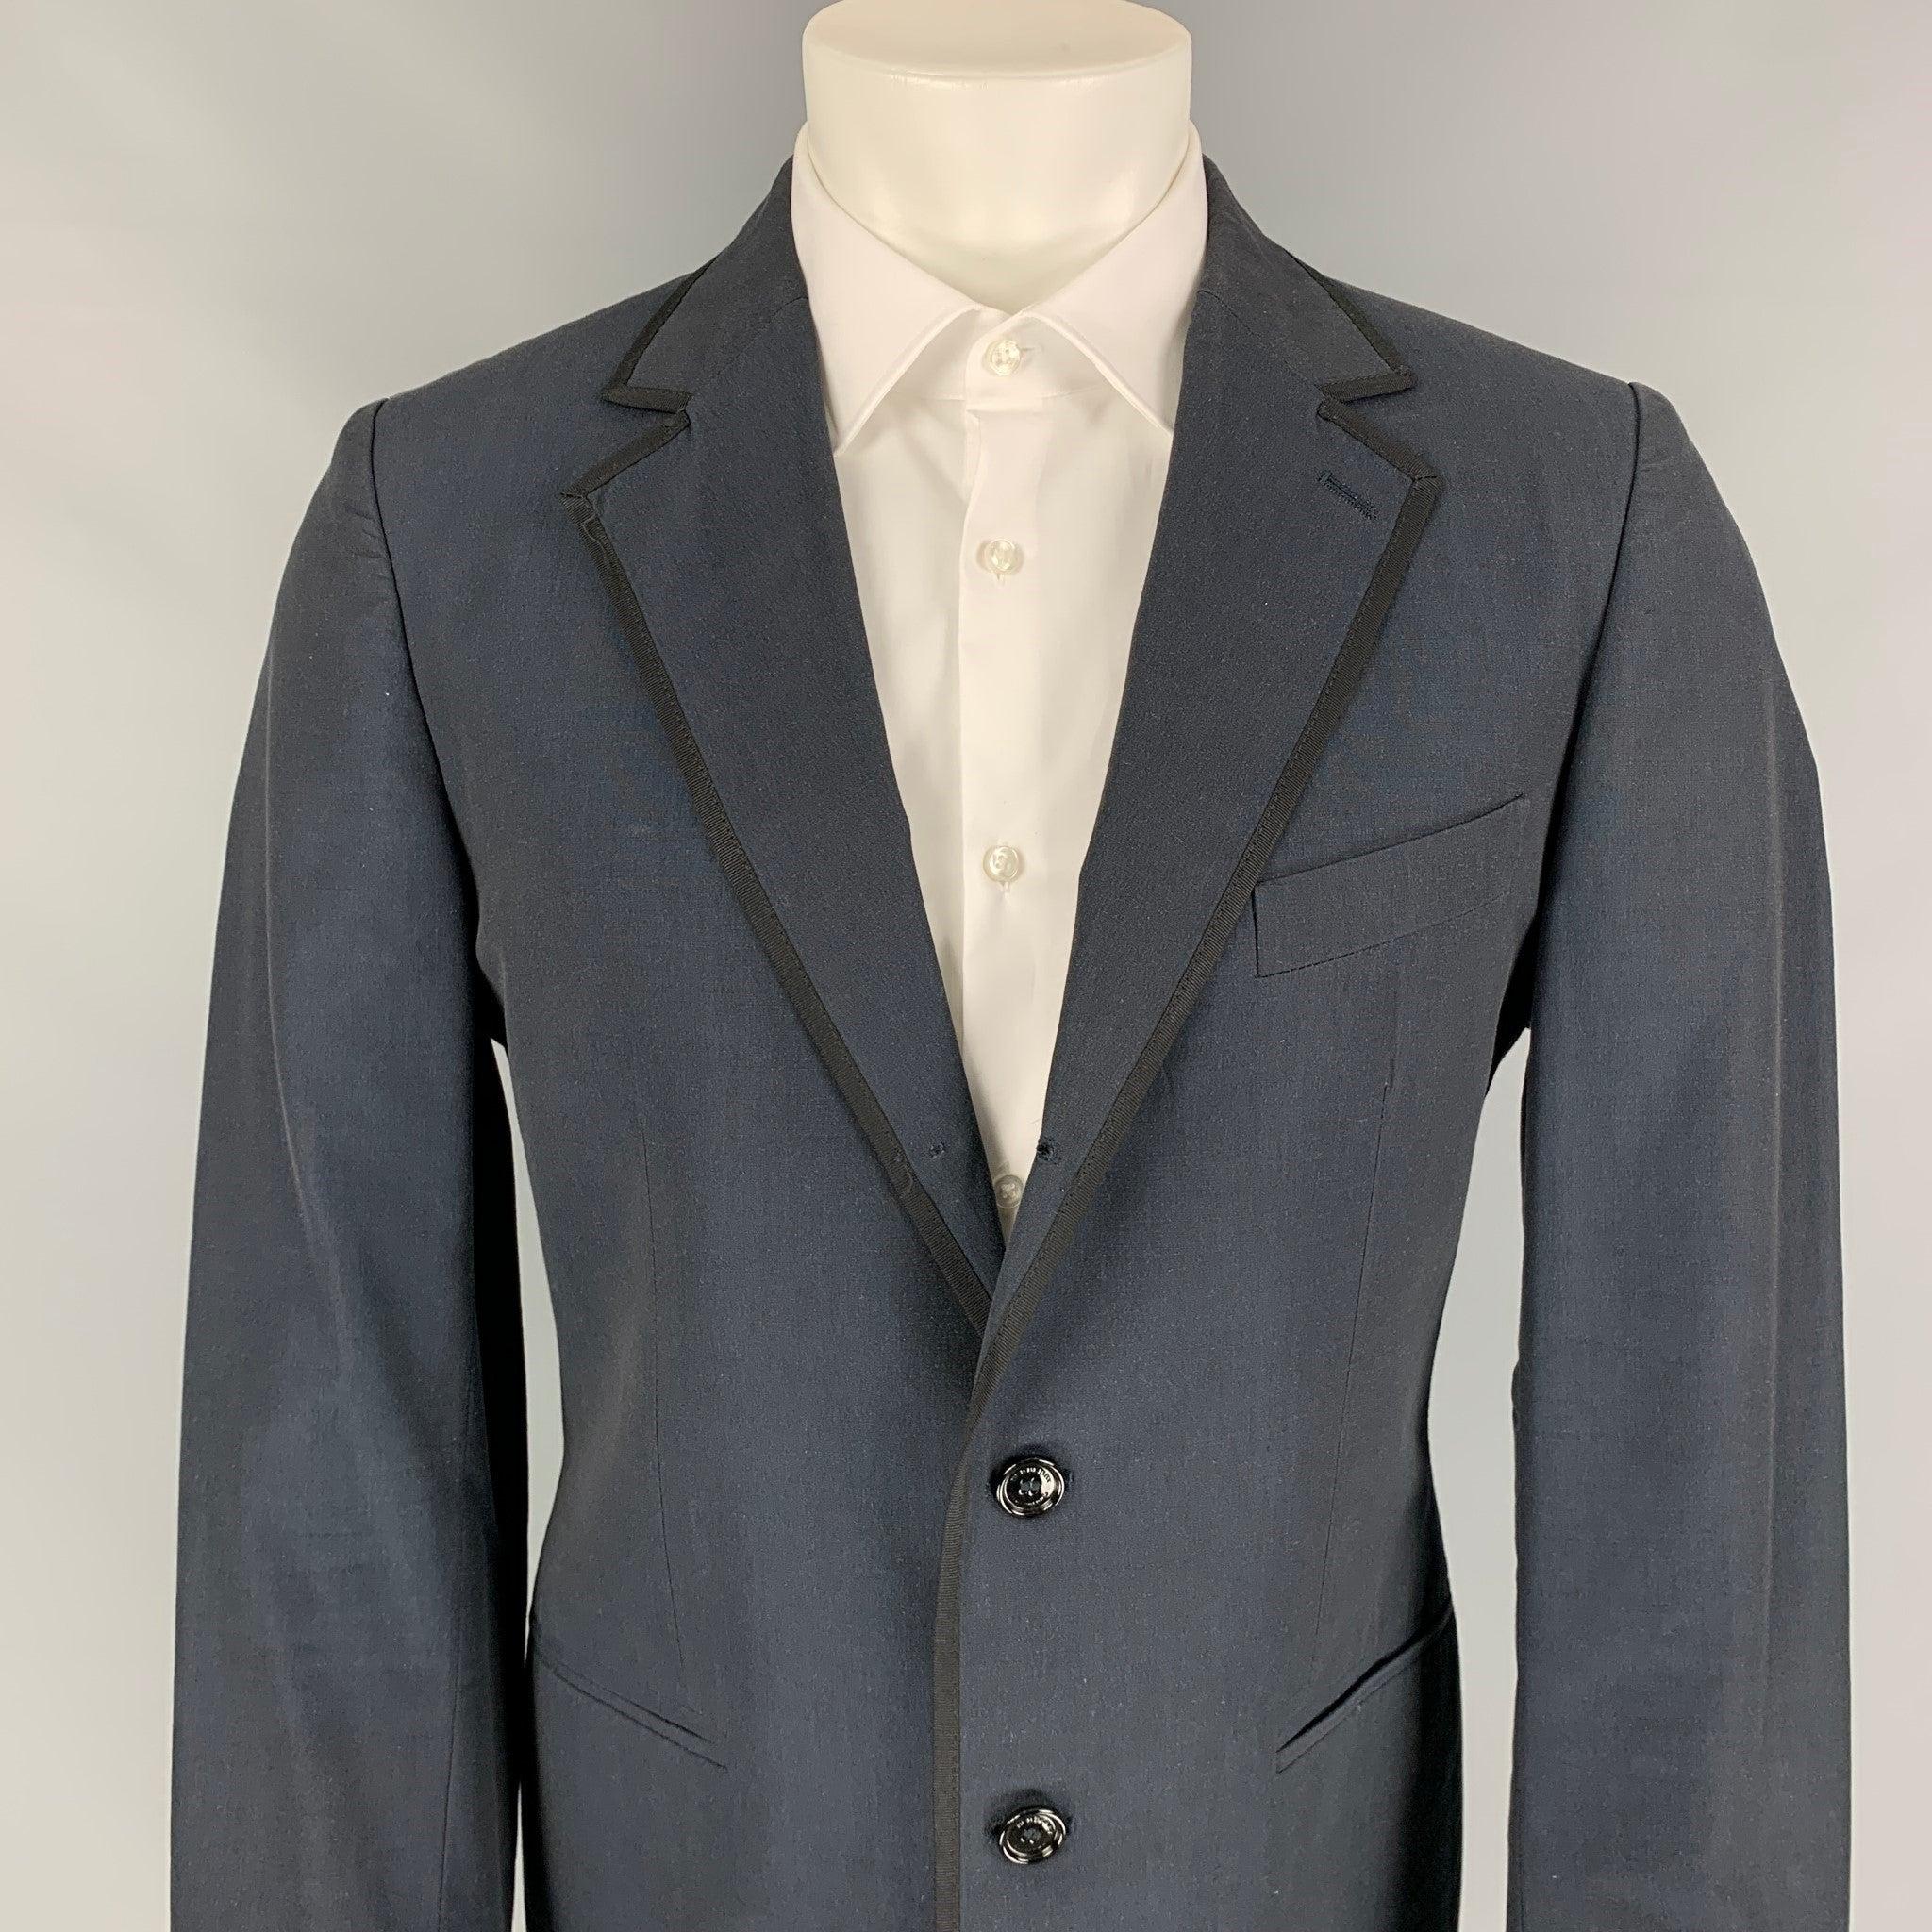 BURBERRY PRORSUM sport coat comes in a navy cotton / mohair with a full liner featuring a notch lapel, black ribbon trim, single back vent, and a double button closure. Made in Italy.
Very Good
Pre-Owned Condition. 

Marked:   52 

Measurements: 
